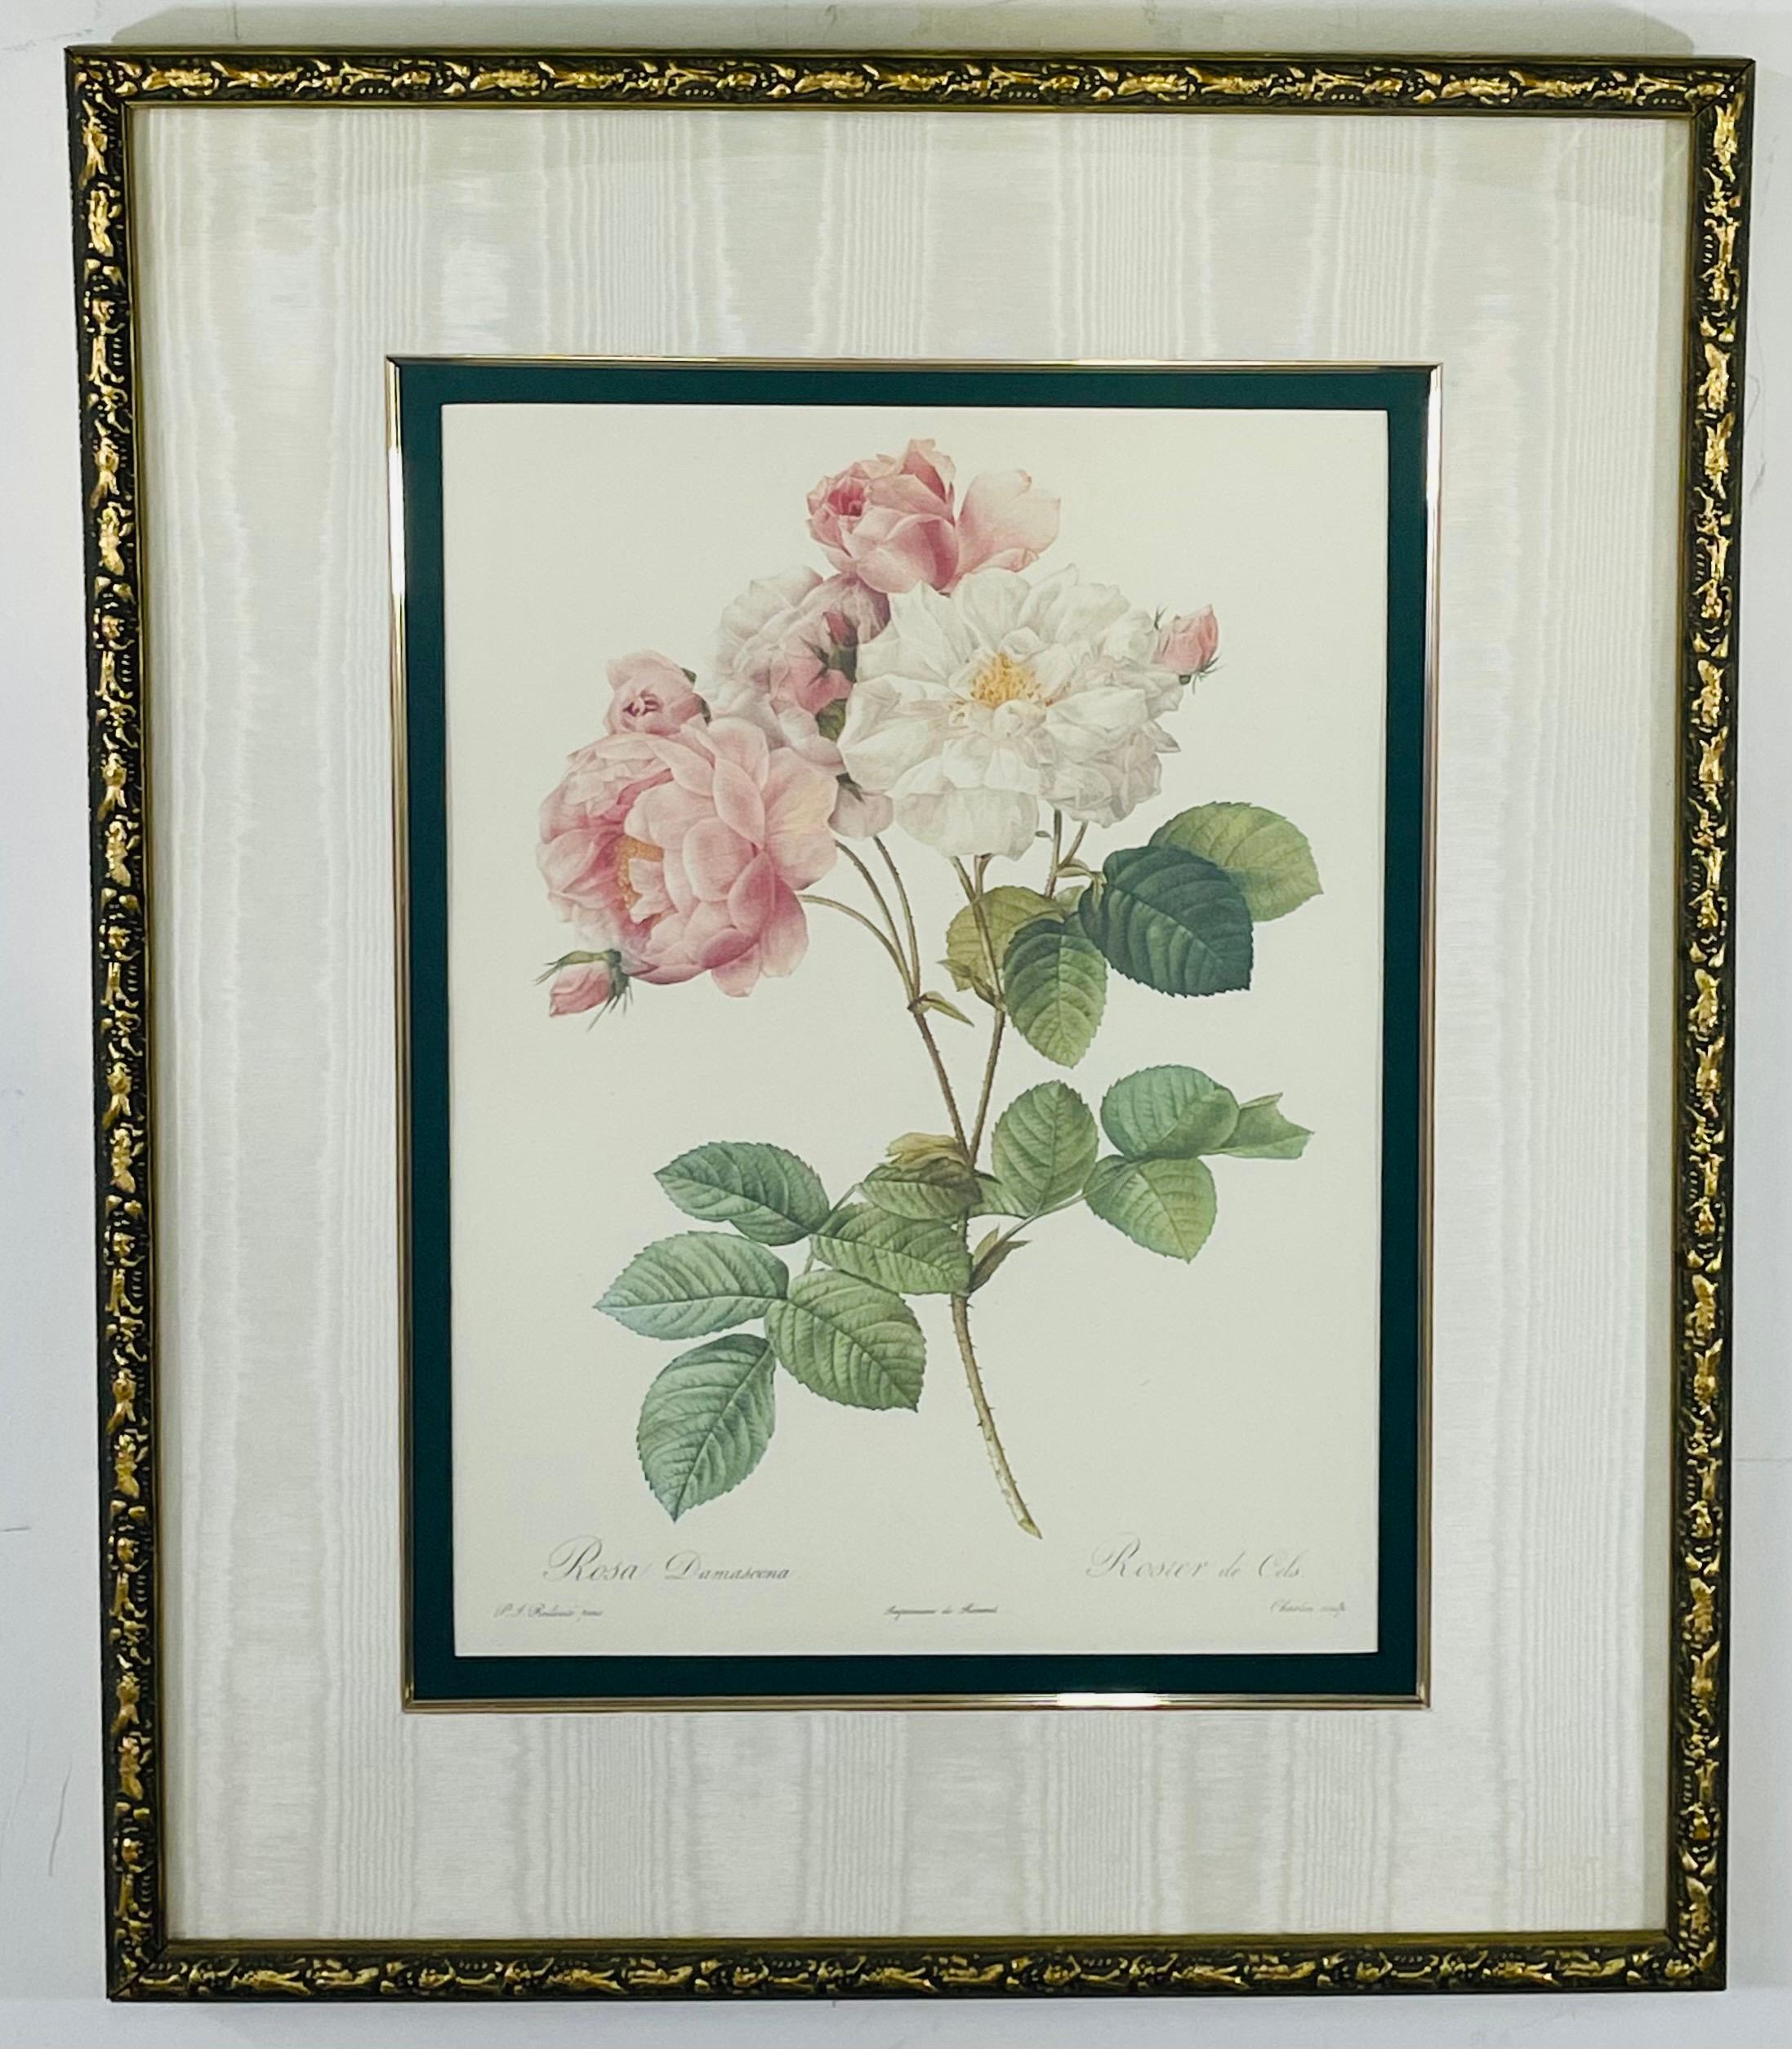 From the private collection of the Bombay Company , these botanicals are a reproduction of the original antique botanical lithograph prints by Pierre-Jospeph Redoute (1759-1840) entitled 